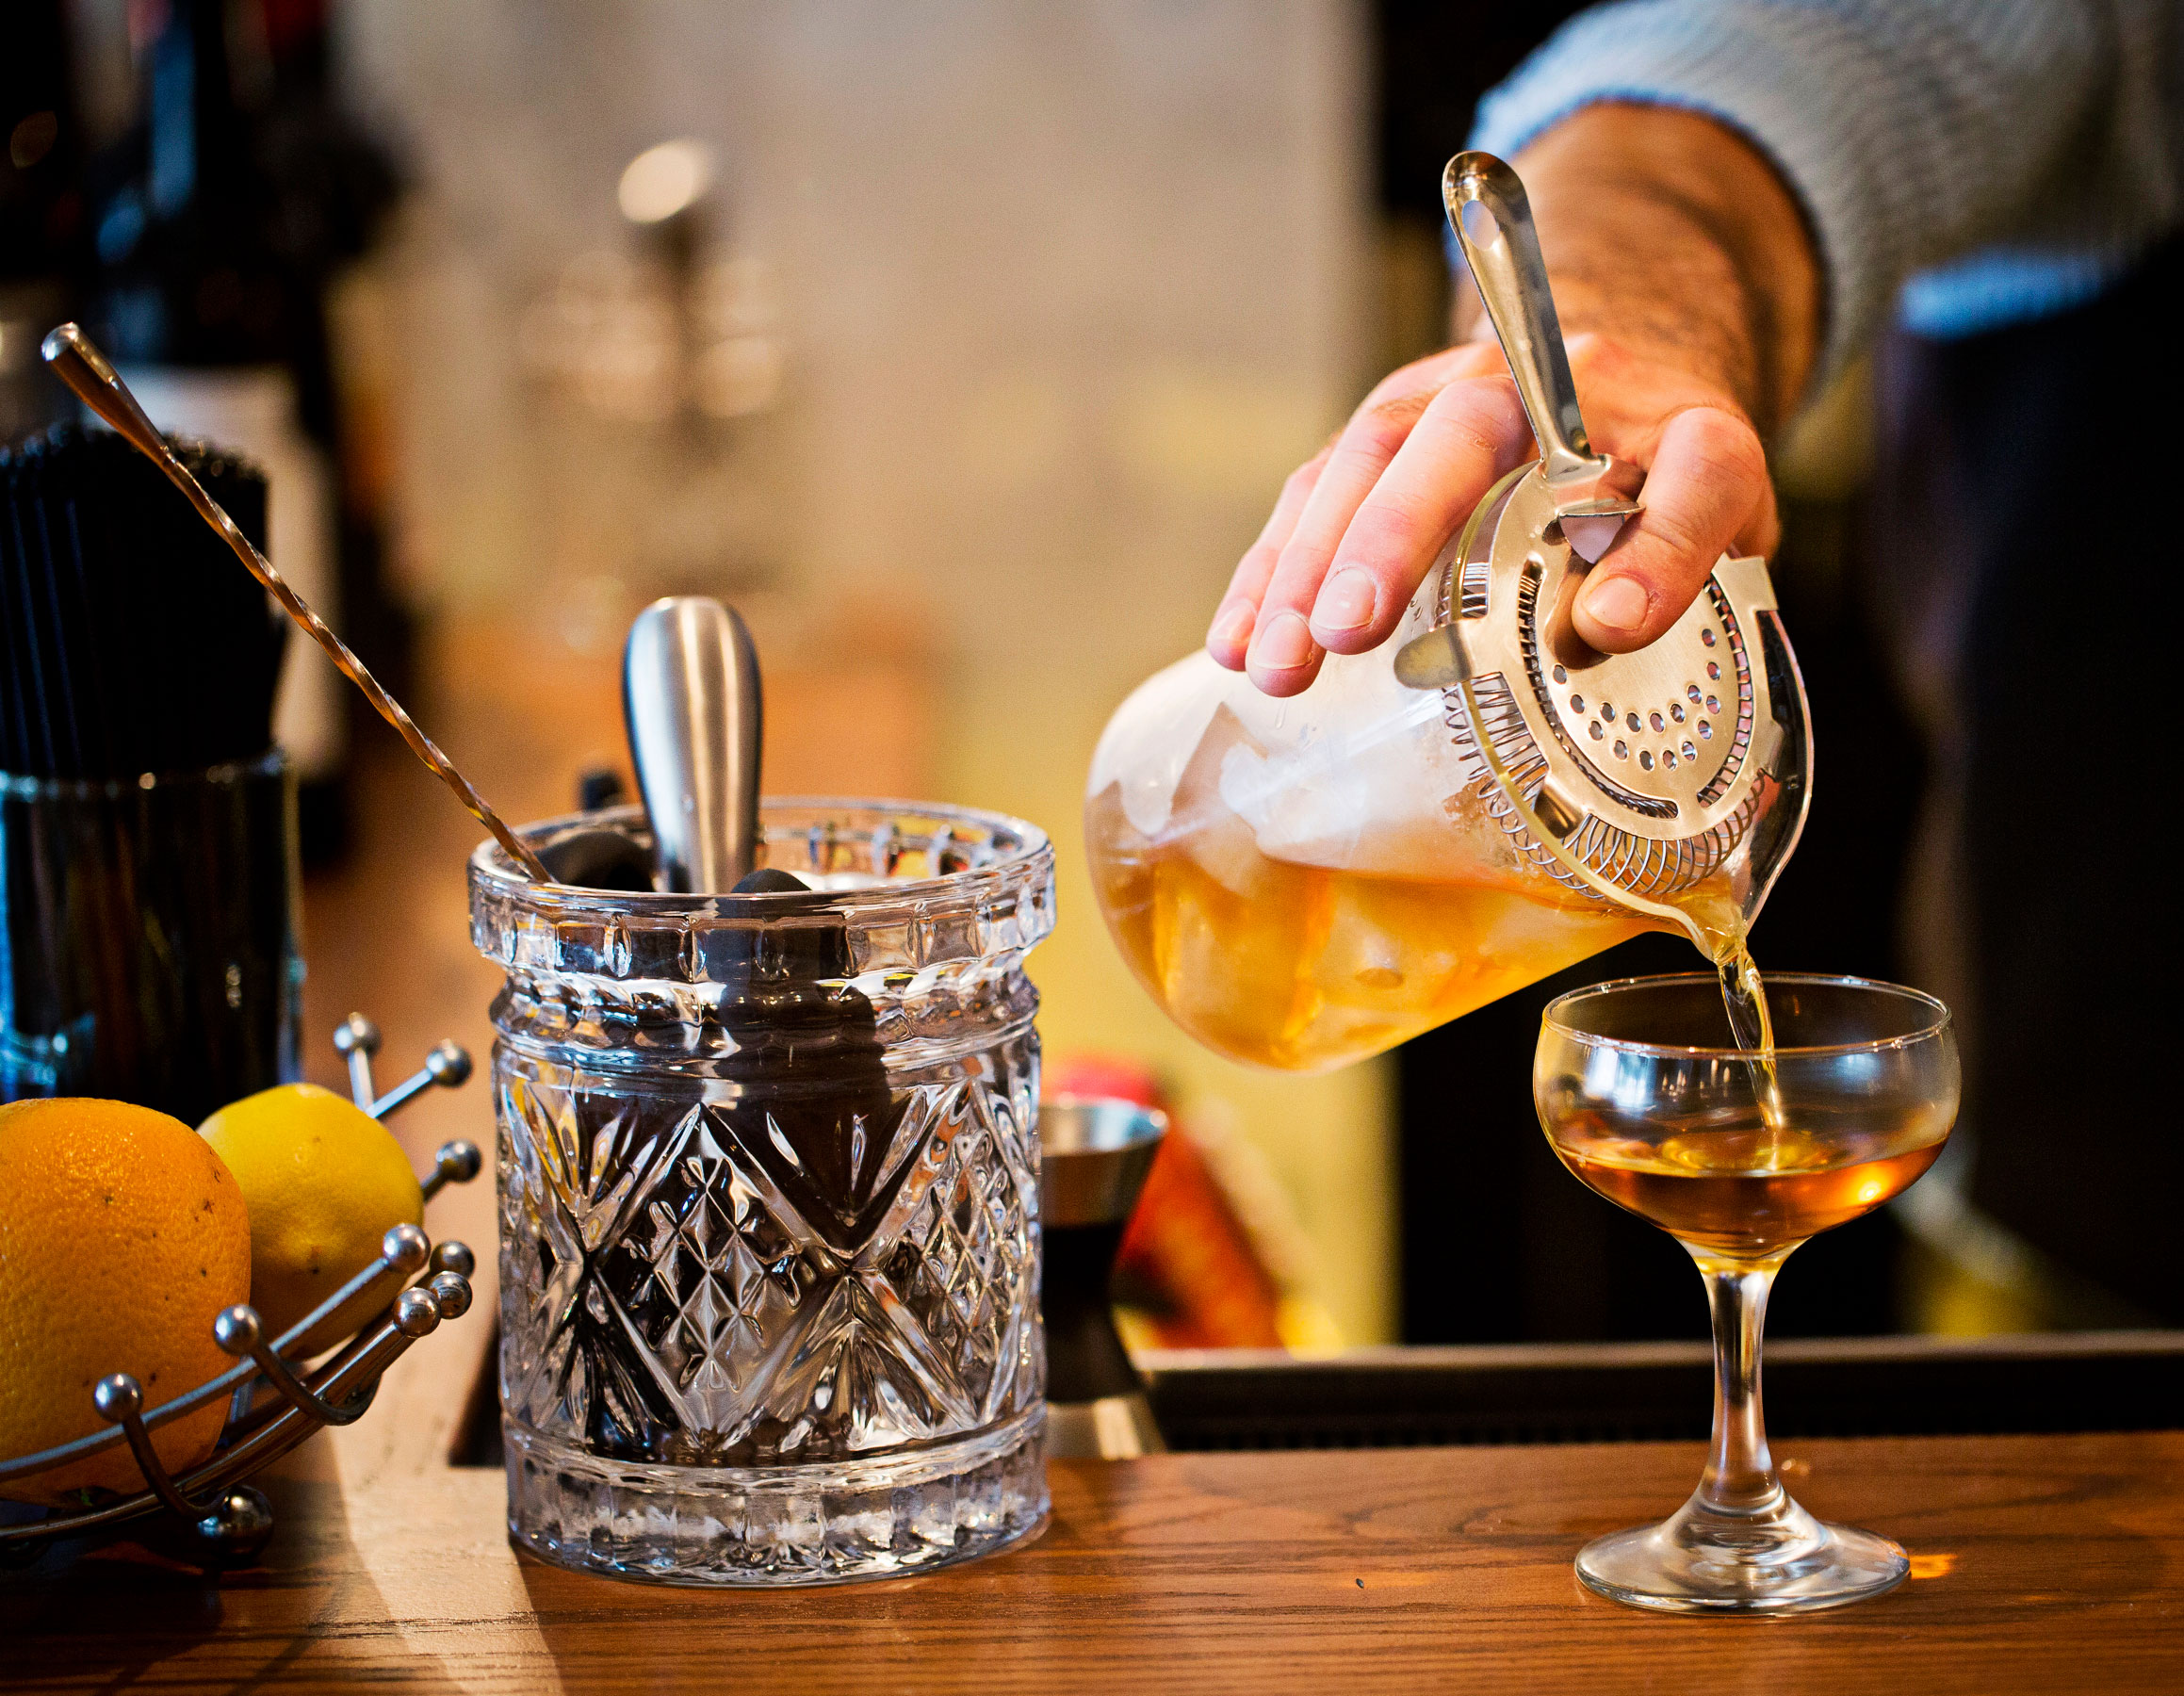 bartender pouring a craft cocktail into a glass